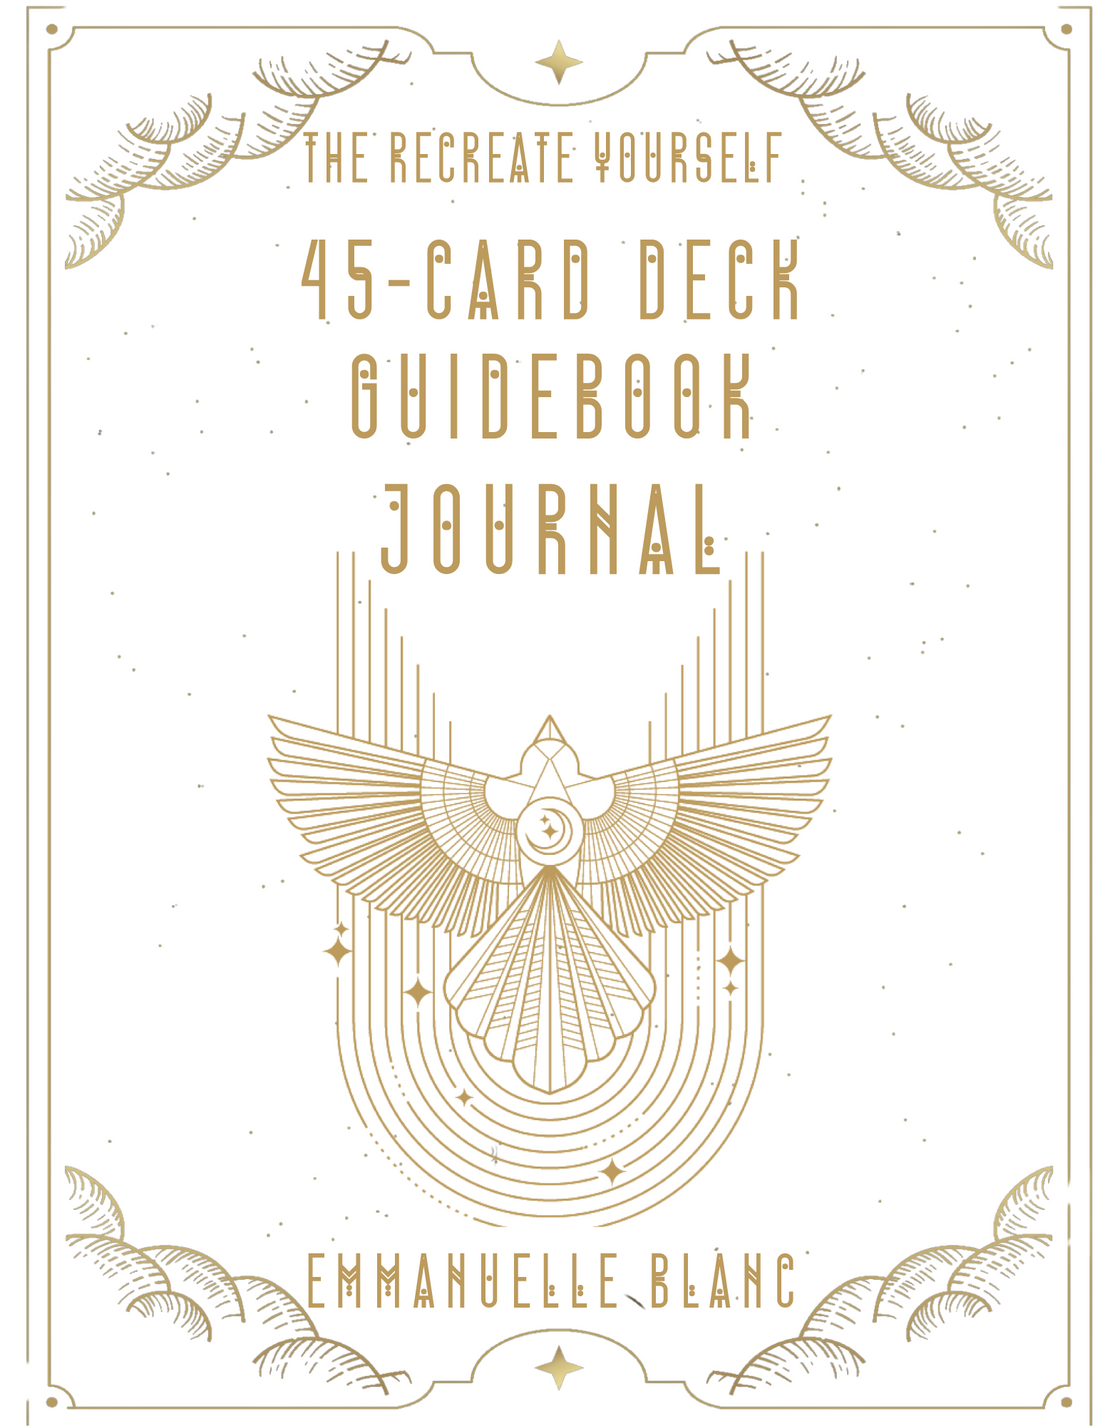 45 CARD GUIDEBOOK JOURNAL COVER UNLEASH YOUR INNER WEALTH 